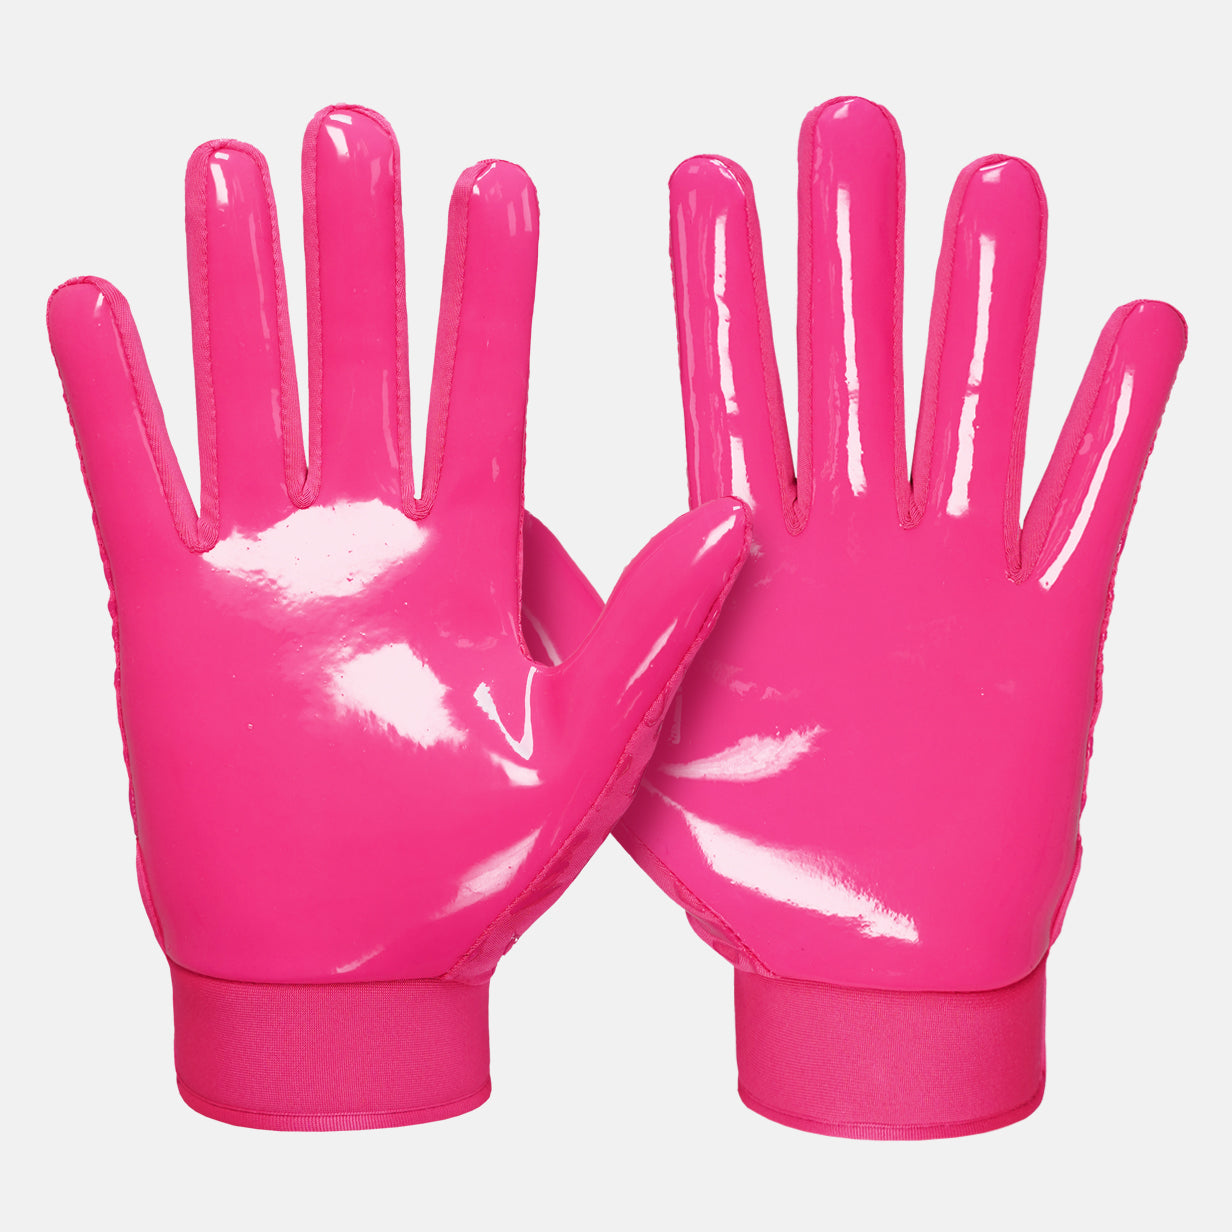 Hue Pink Sticky Football Receiver Gloves